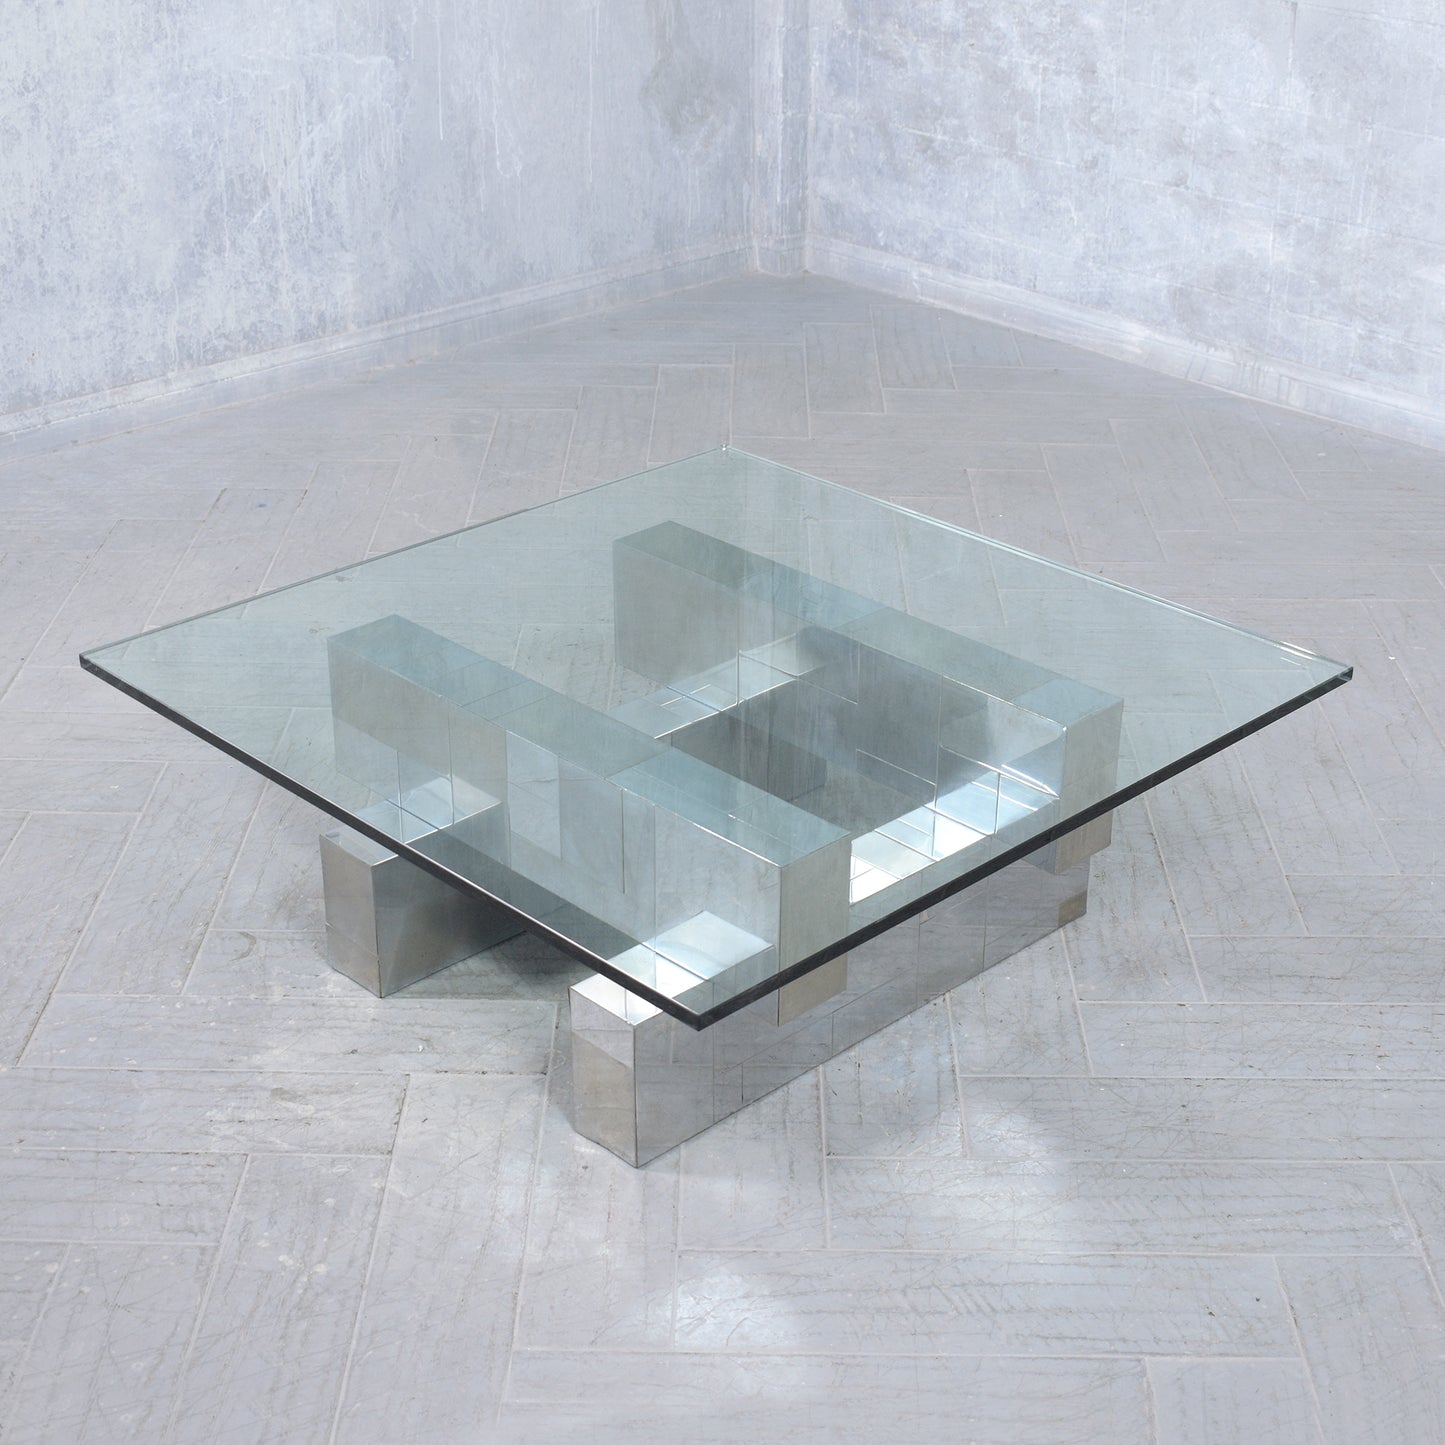 1960 Mid-Century Modern Paul Evans Inspired Coffee Table with Brushed Steel Base